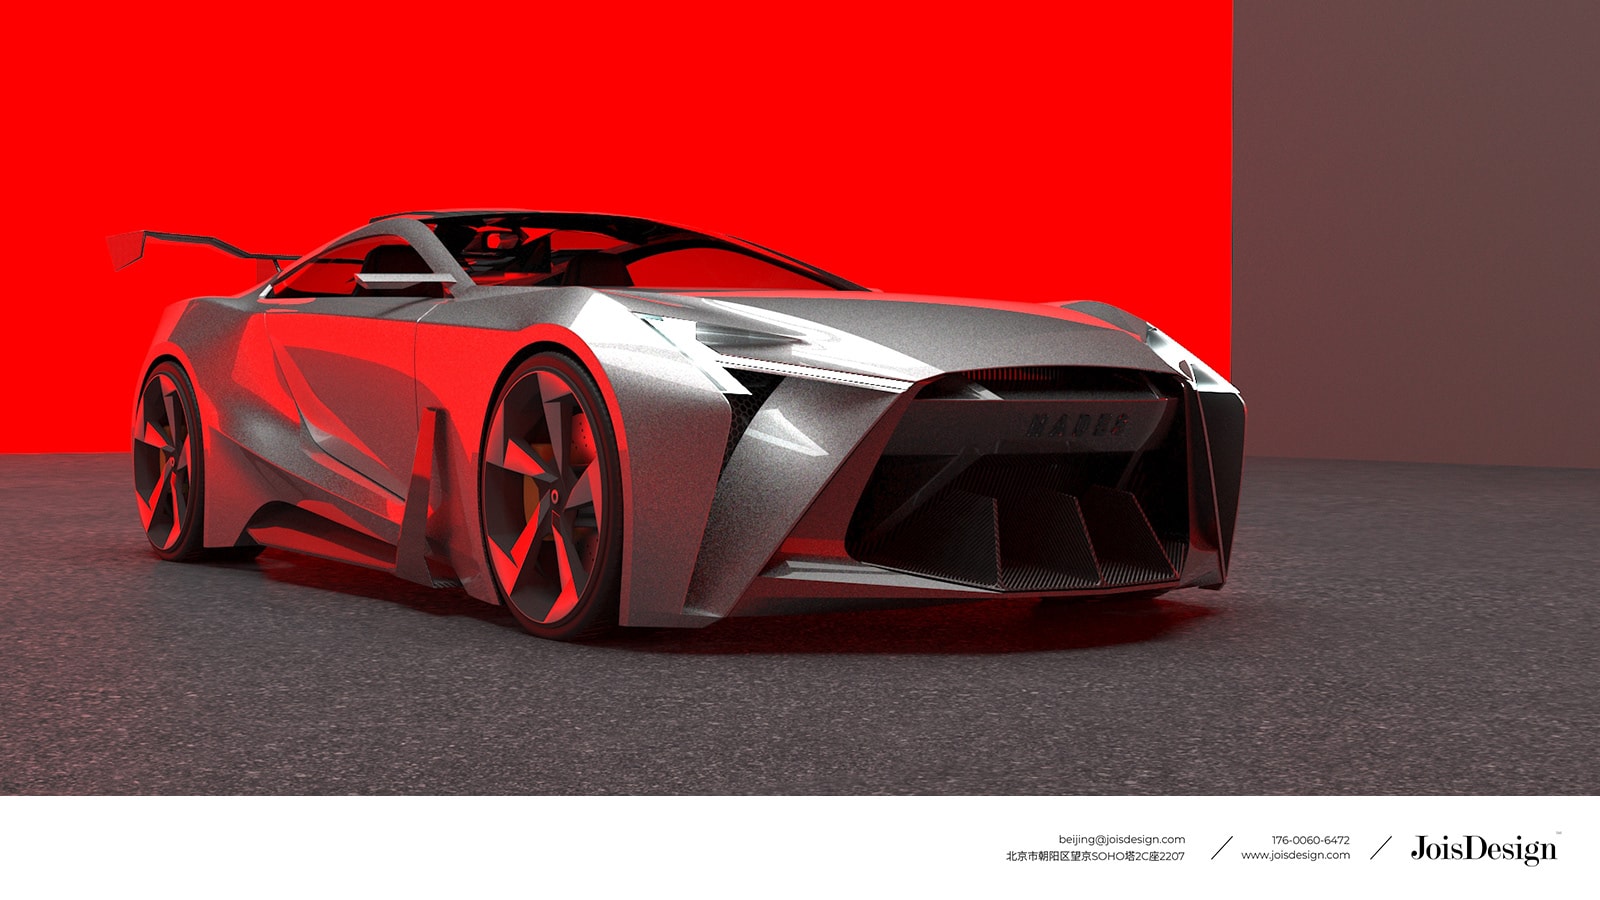 Concept of a future Nissan GT-R sports car